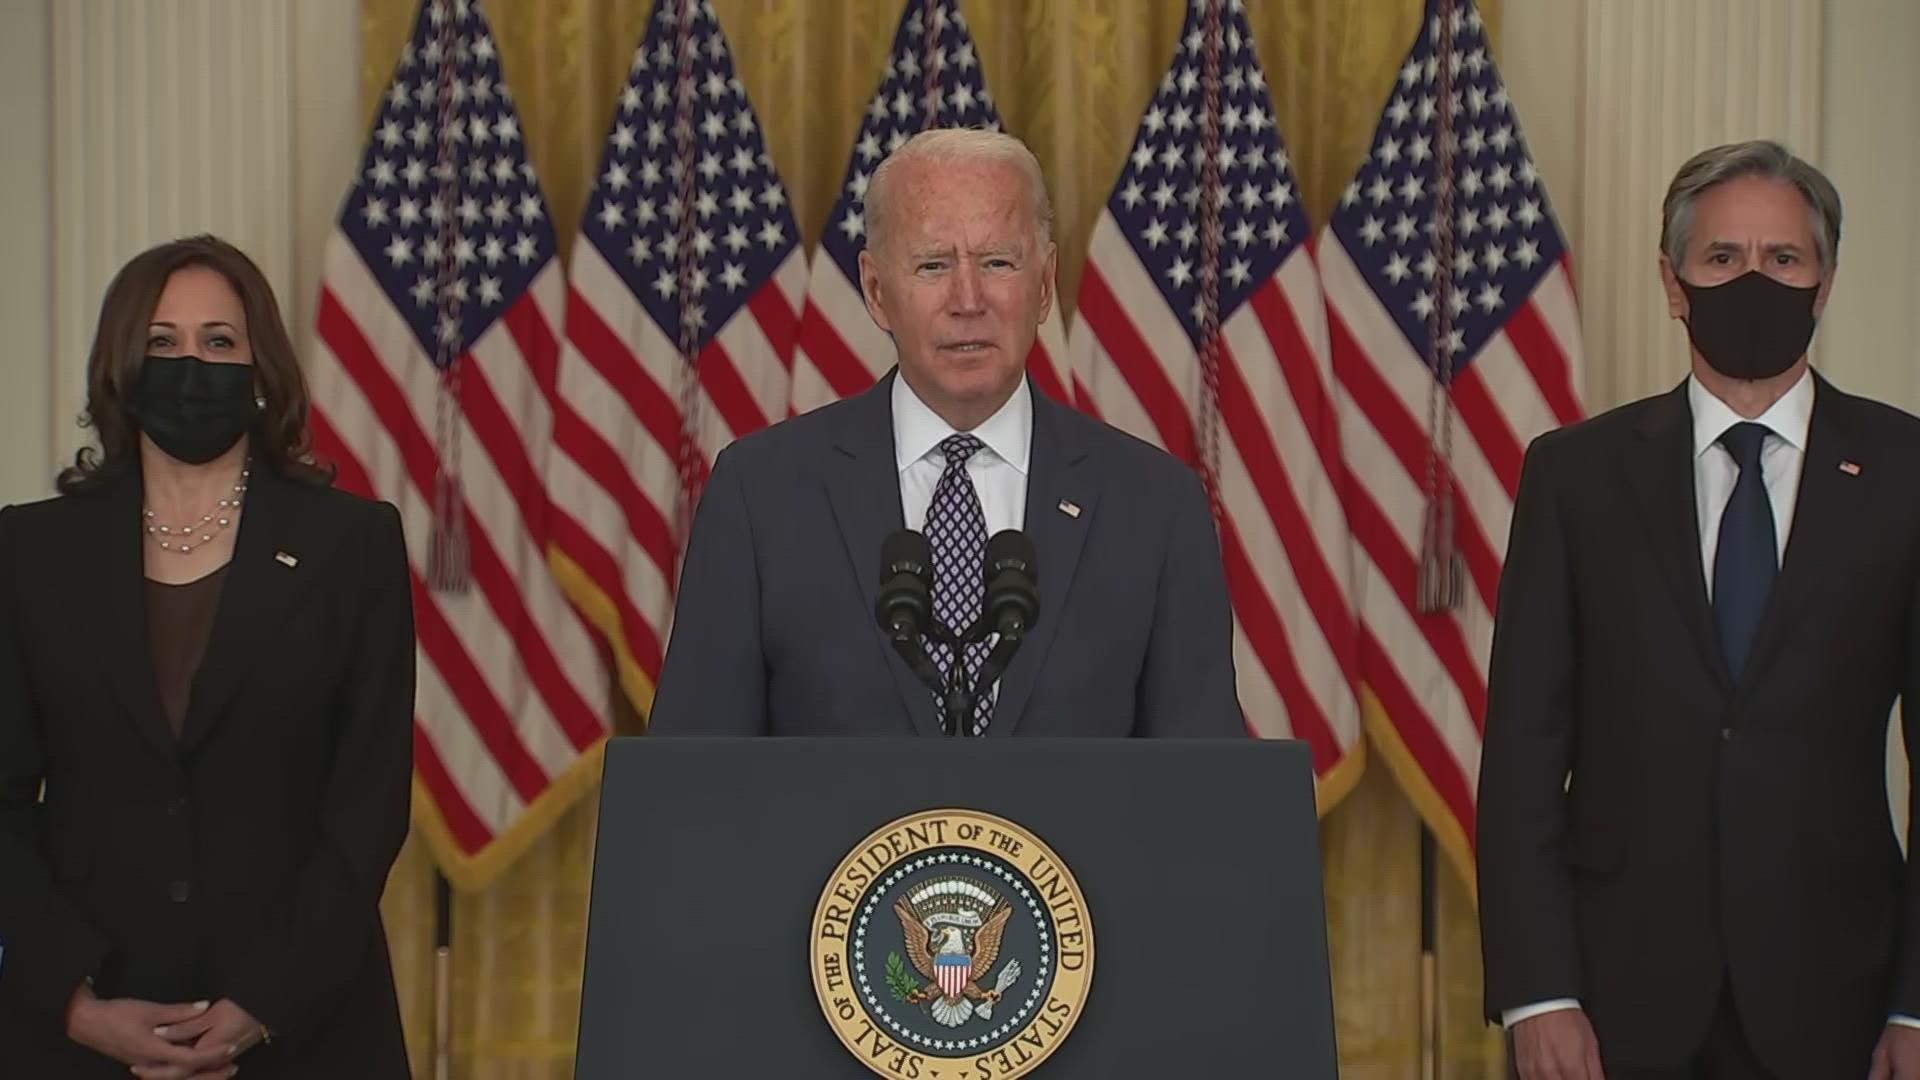 President Biden said Friday he will mobilize every resource necessary to get all Americans in Afghanistan home.